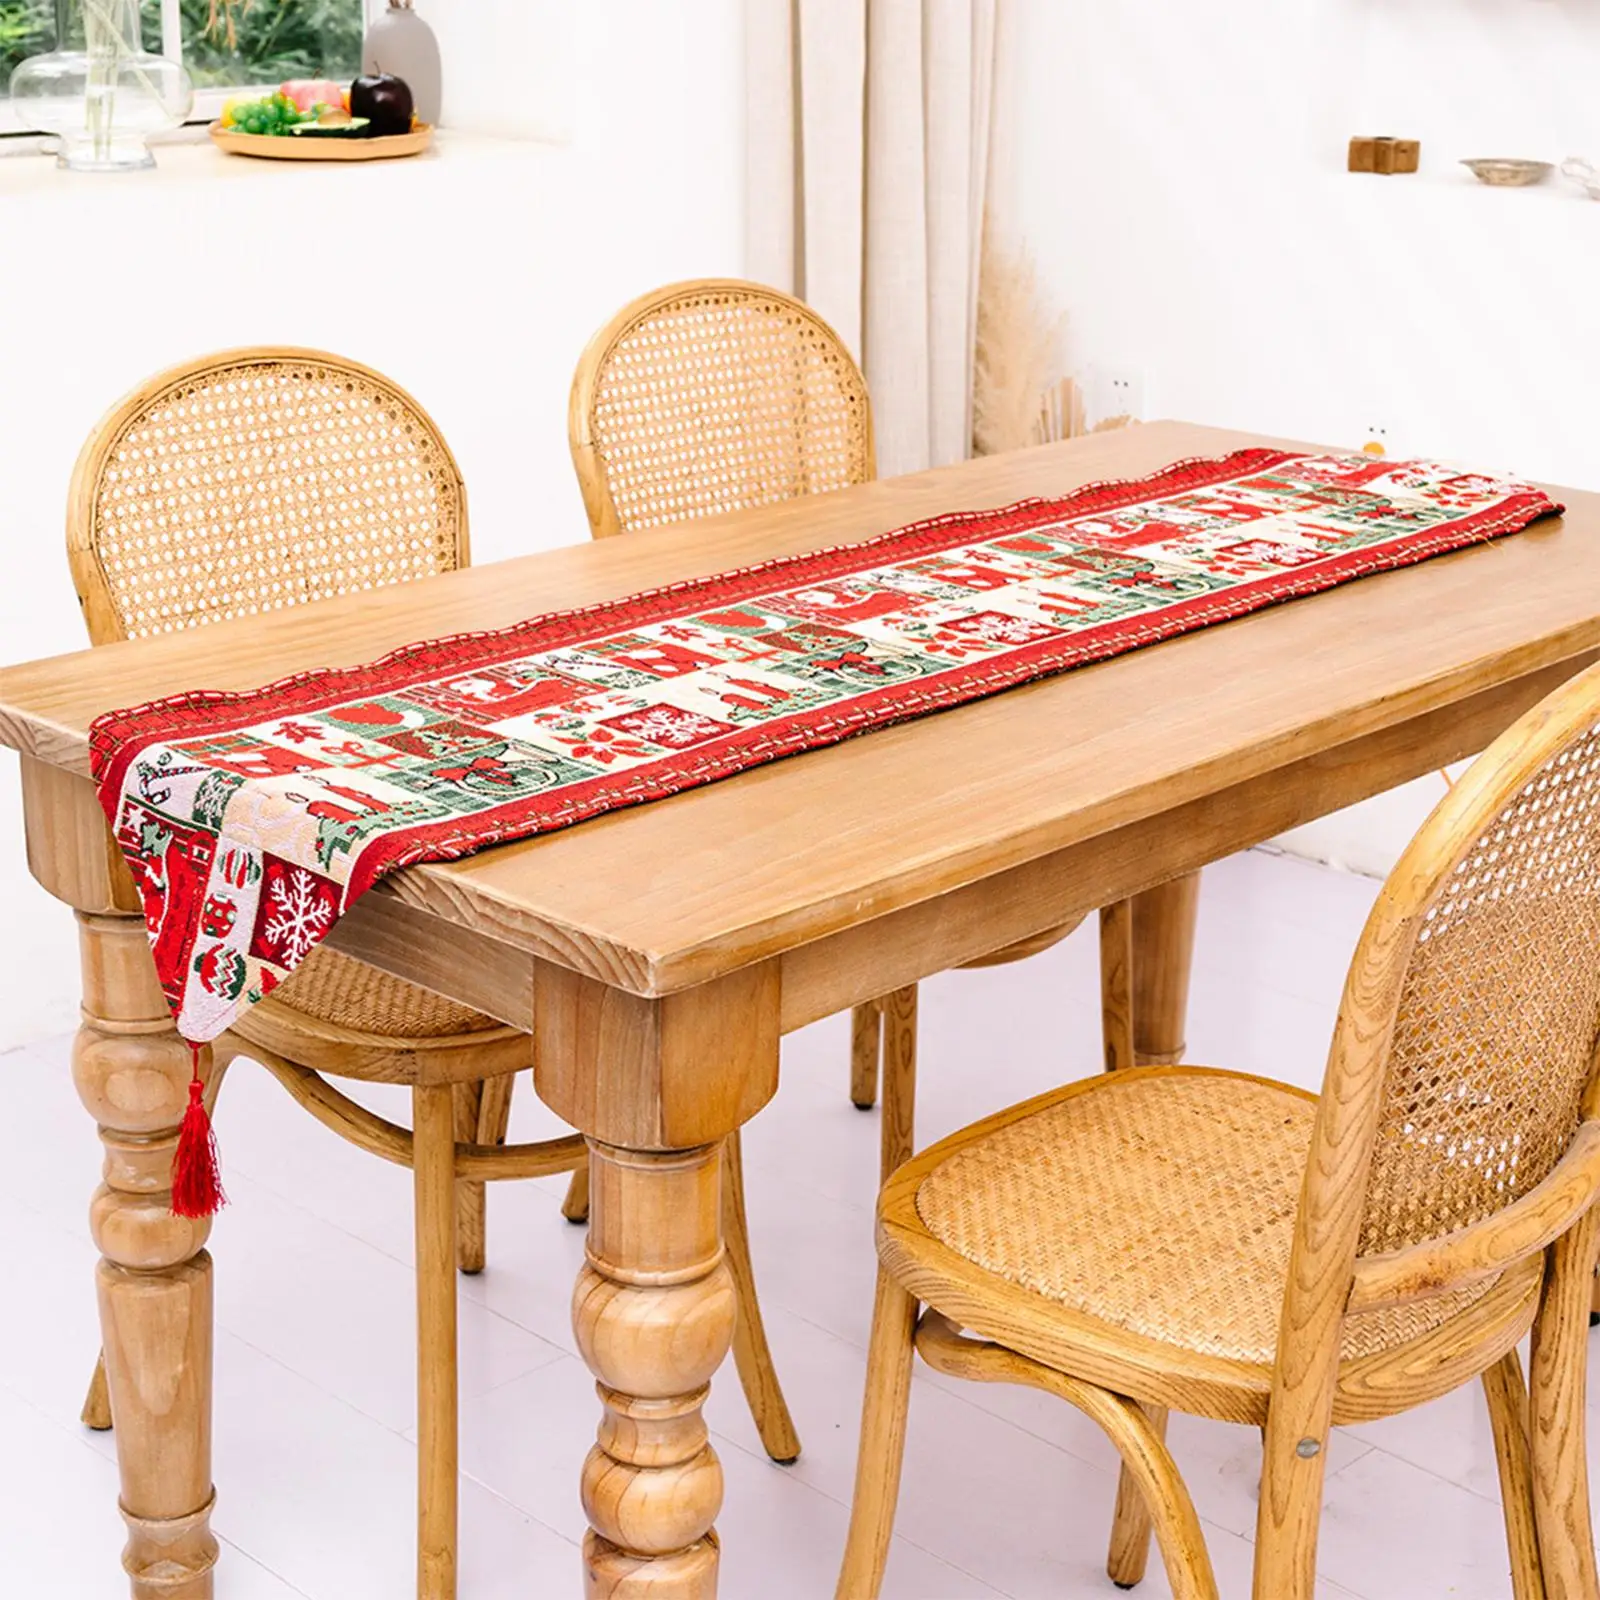 Tablecloth Breathable Decorative Desk Runner for Festival Dinner Parties Holiday